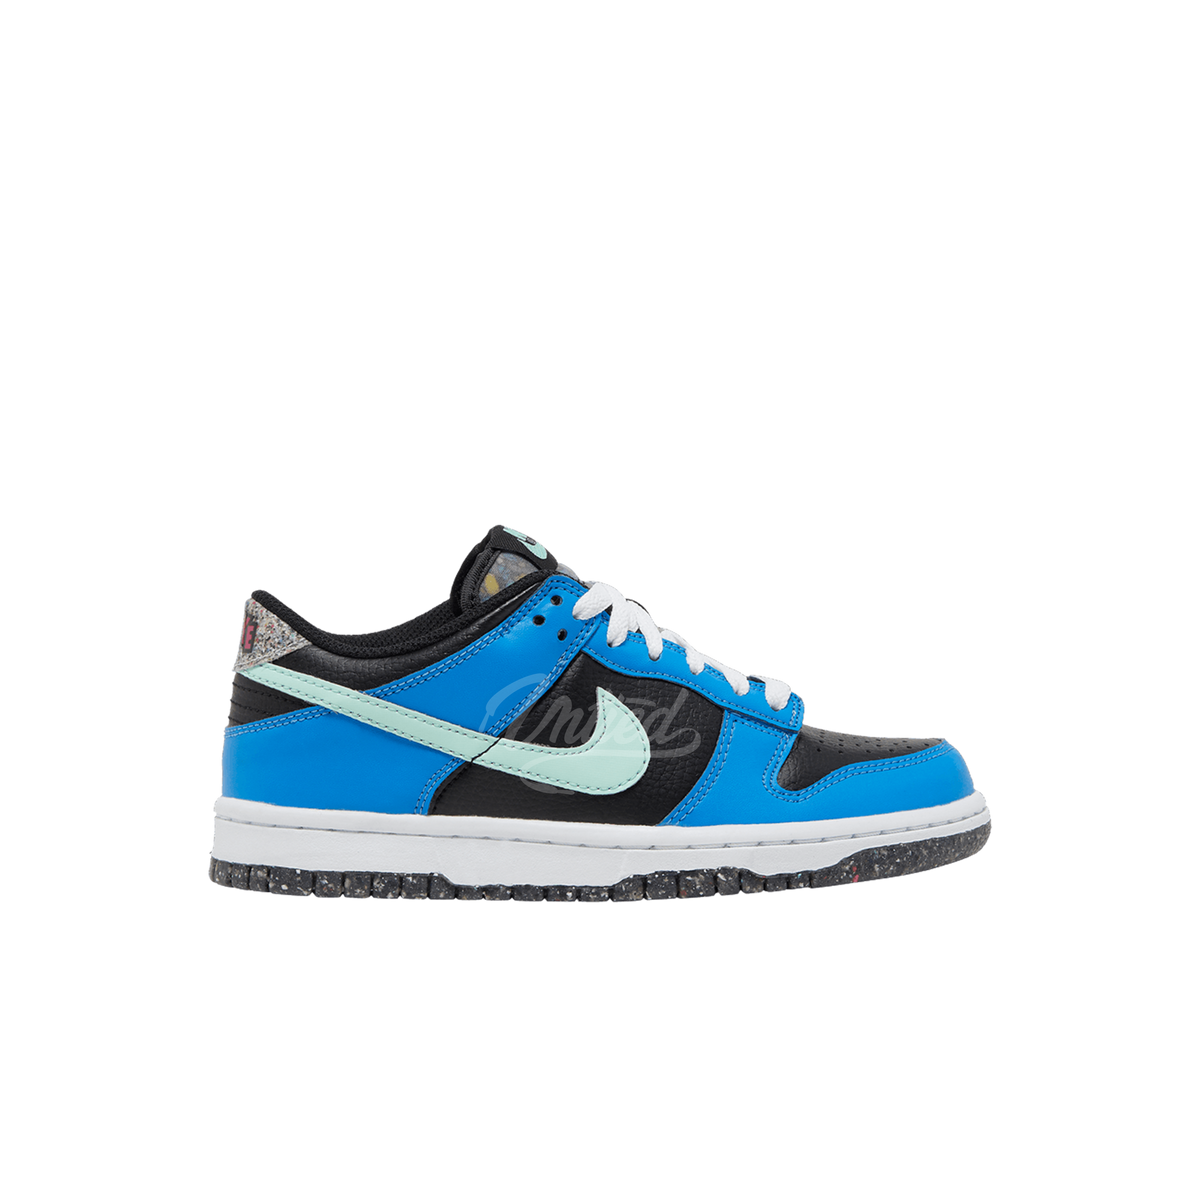 Nike Dunk Low "Blue/Black Crater" (GS)